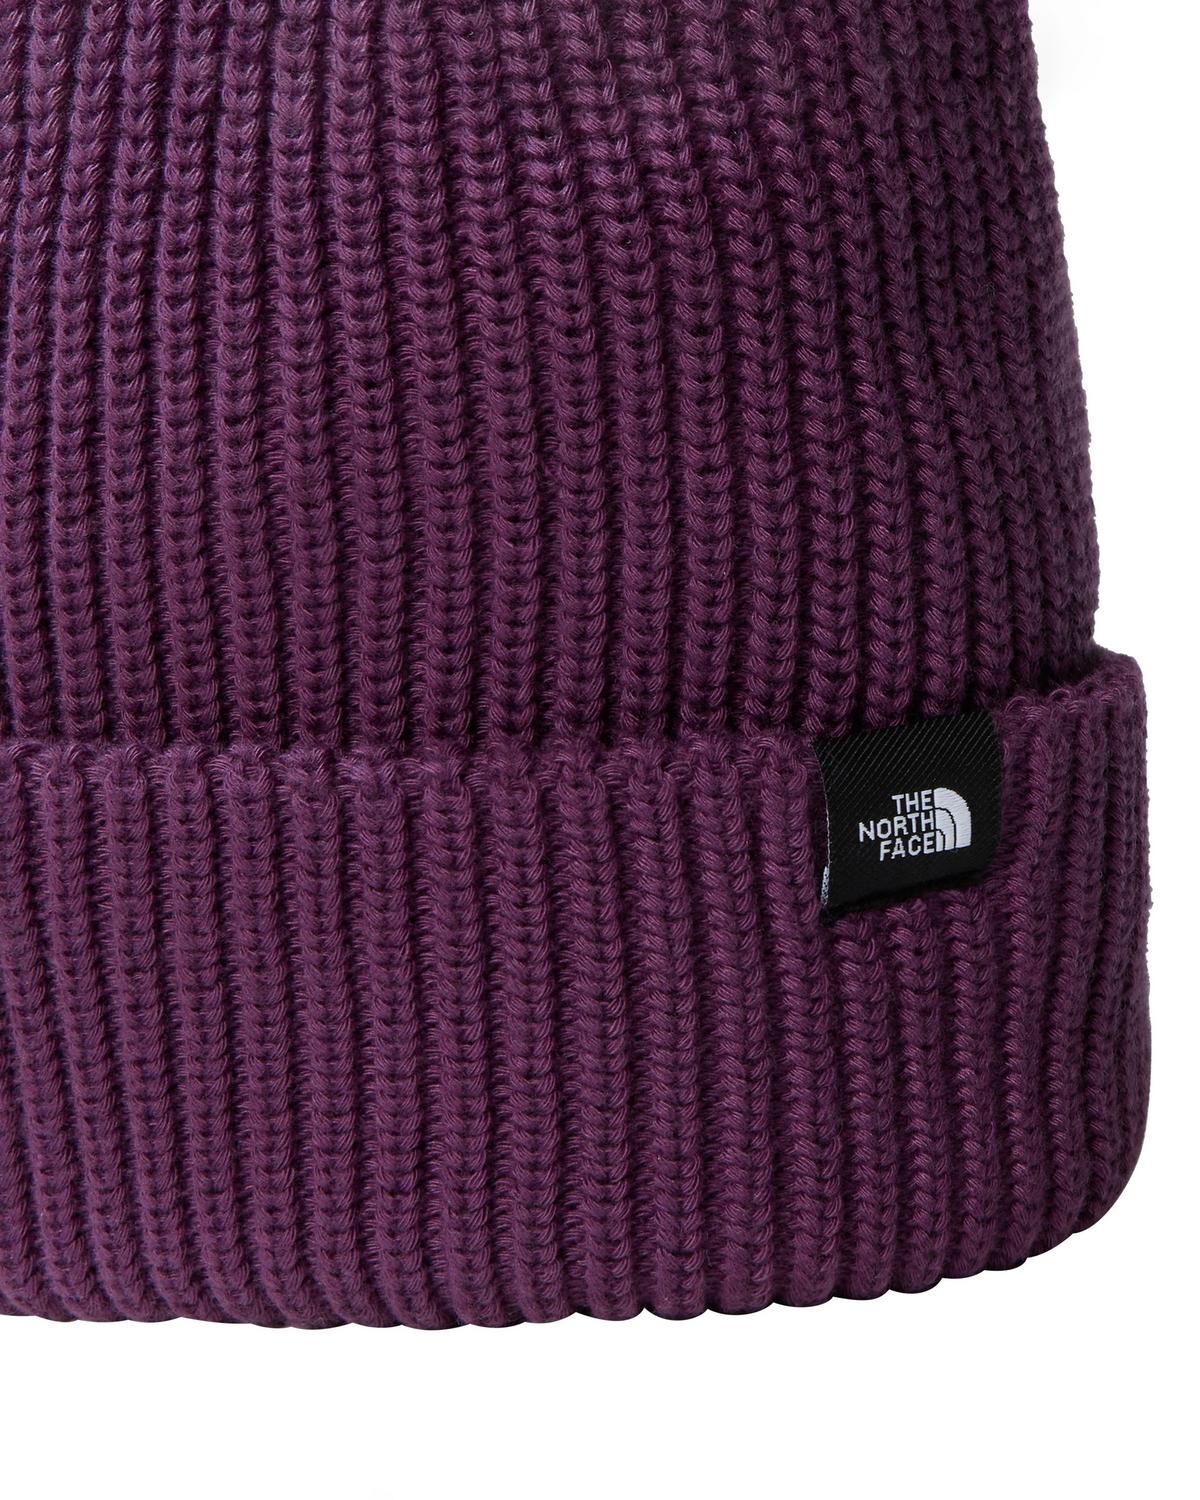 The North Face Fisherman Beanie -  Purple